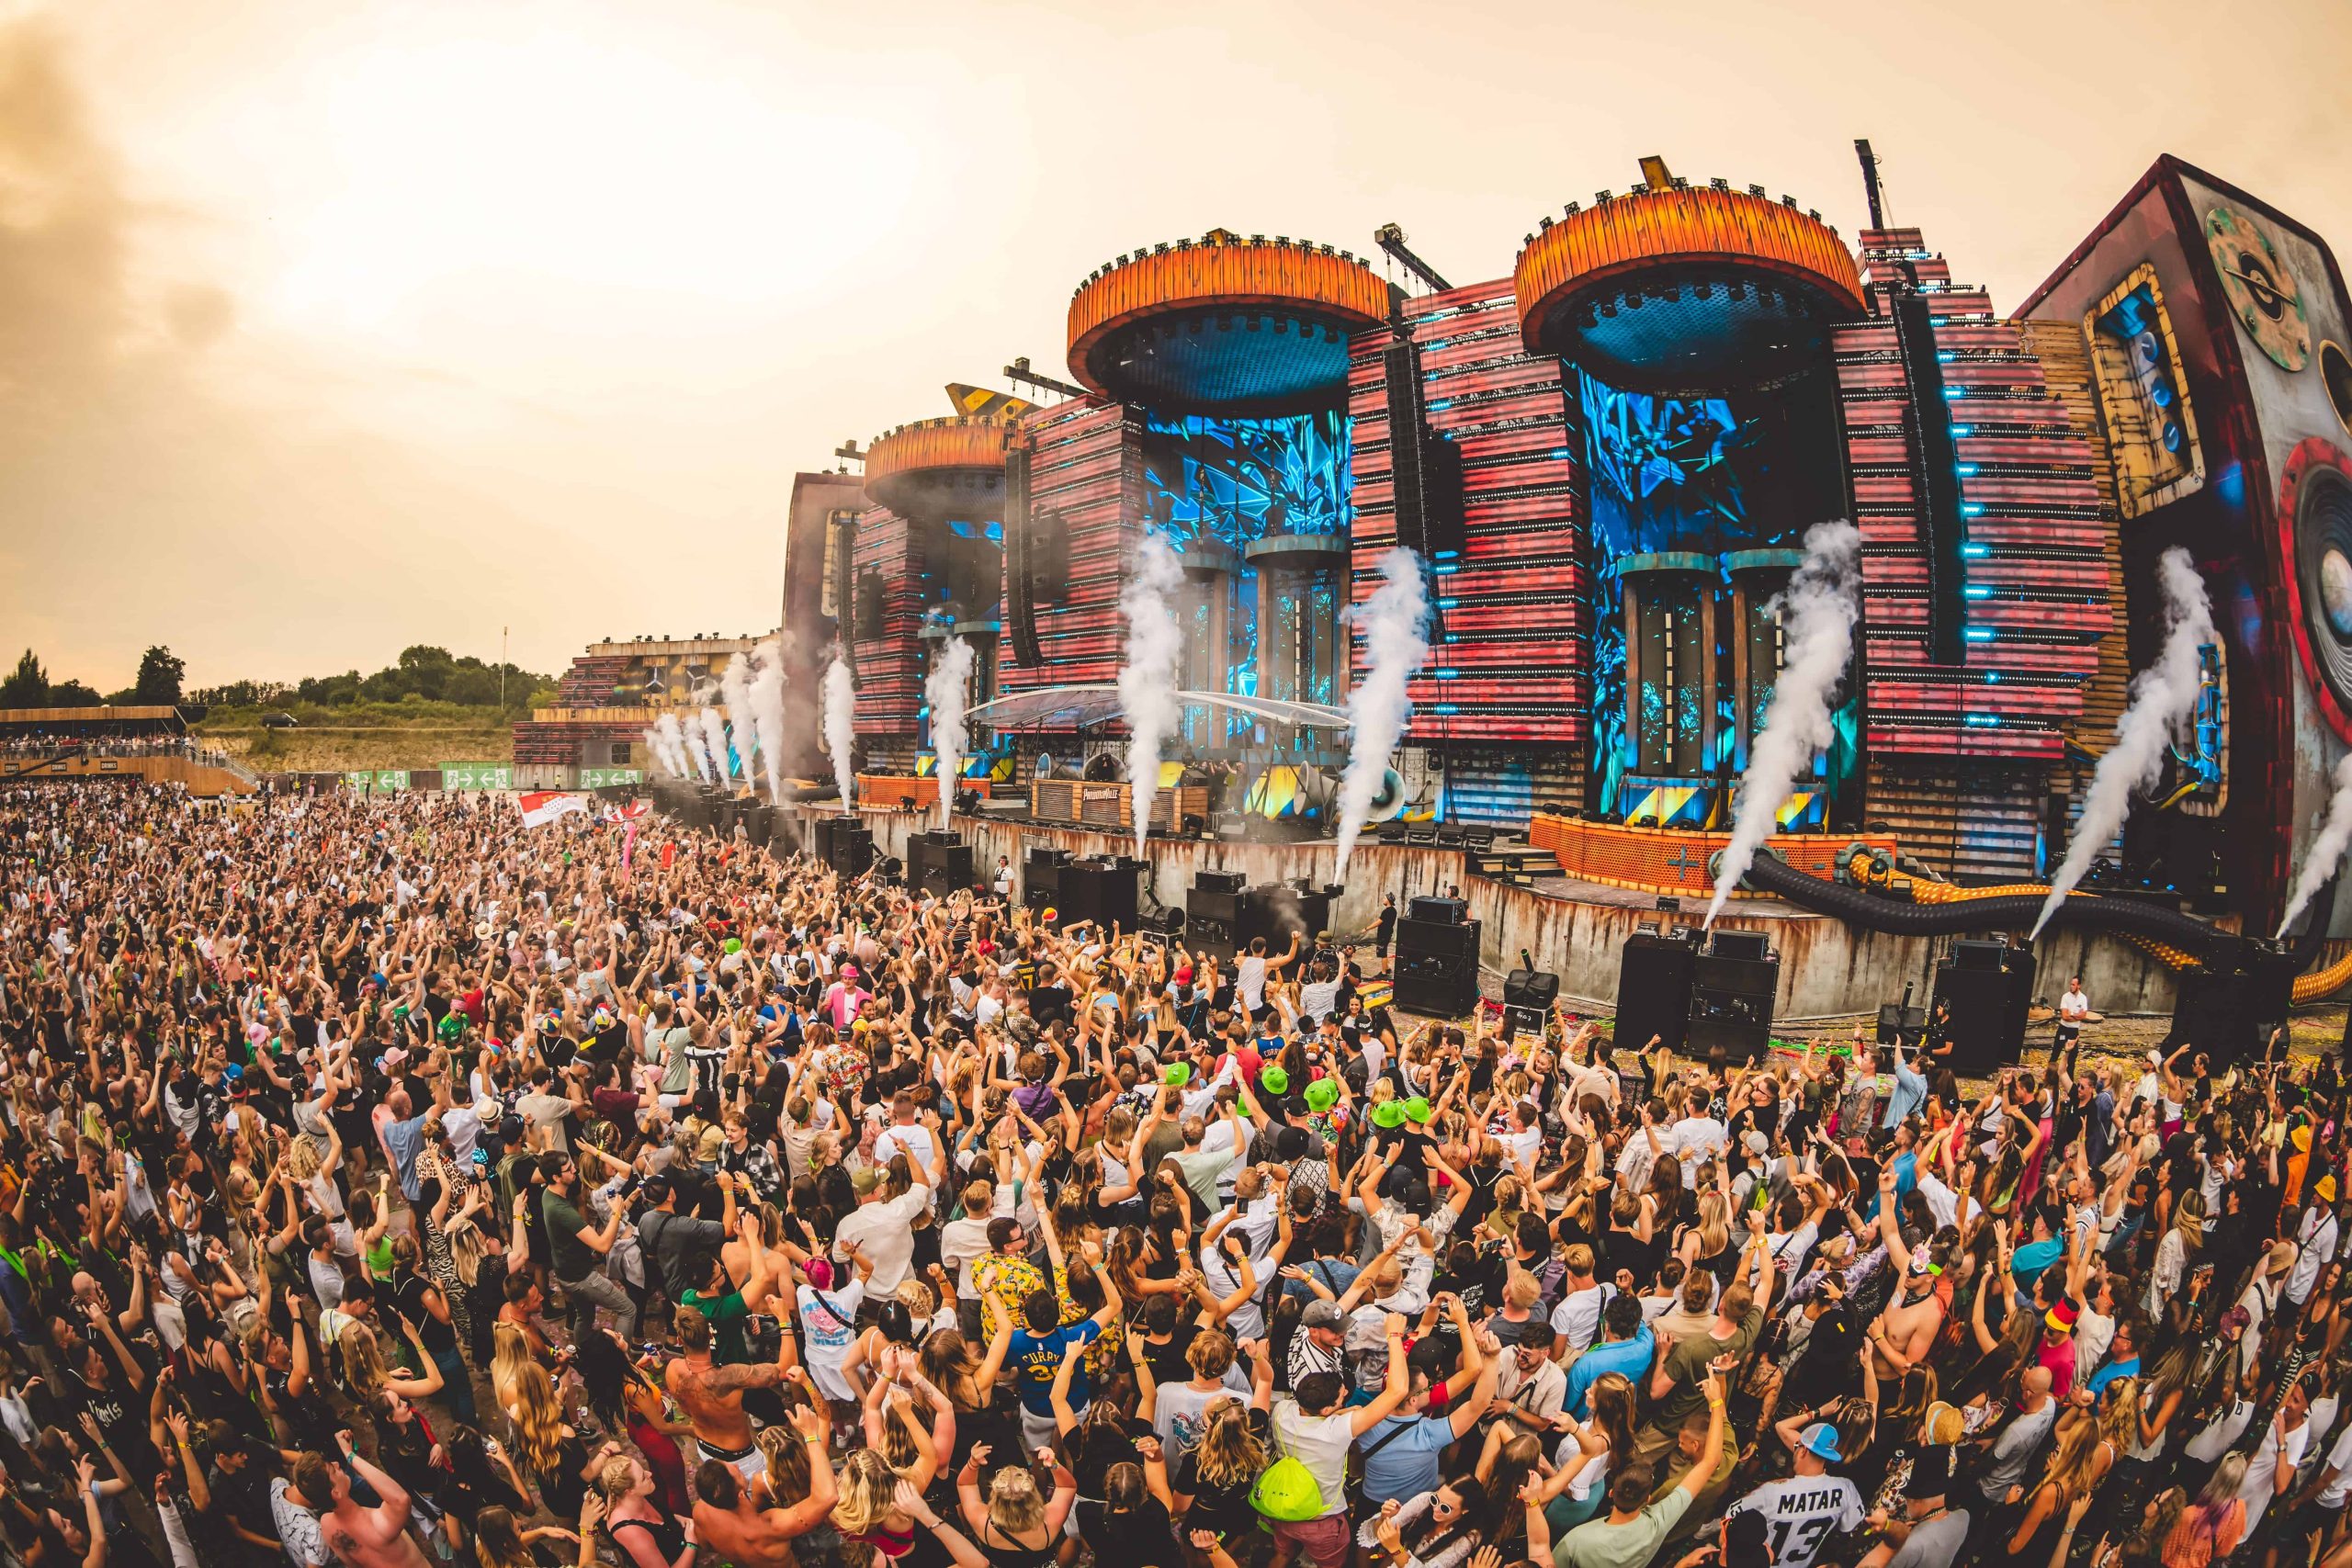 Germany's PAROOKAVILLE 2021 is set to be rescheduled to September